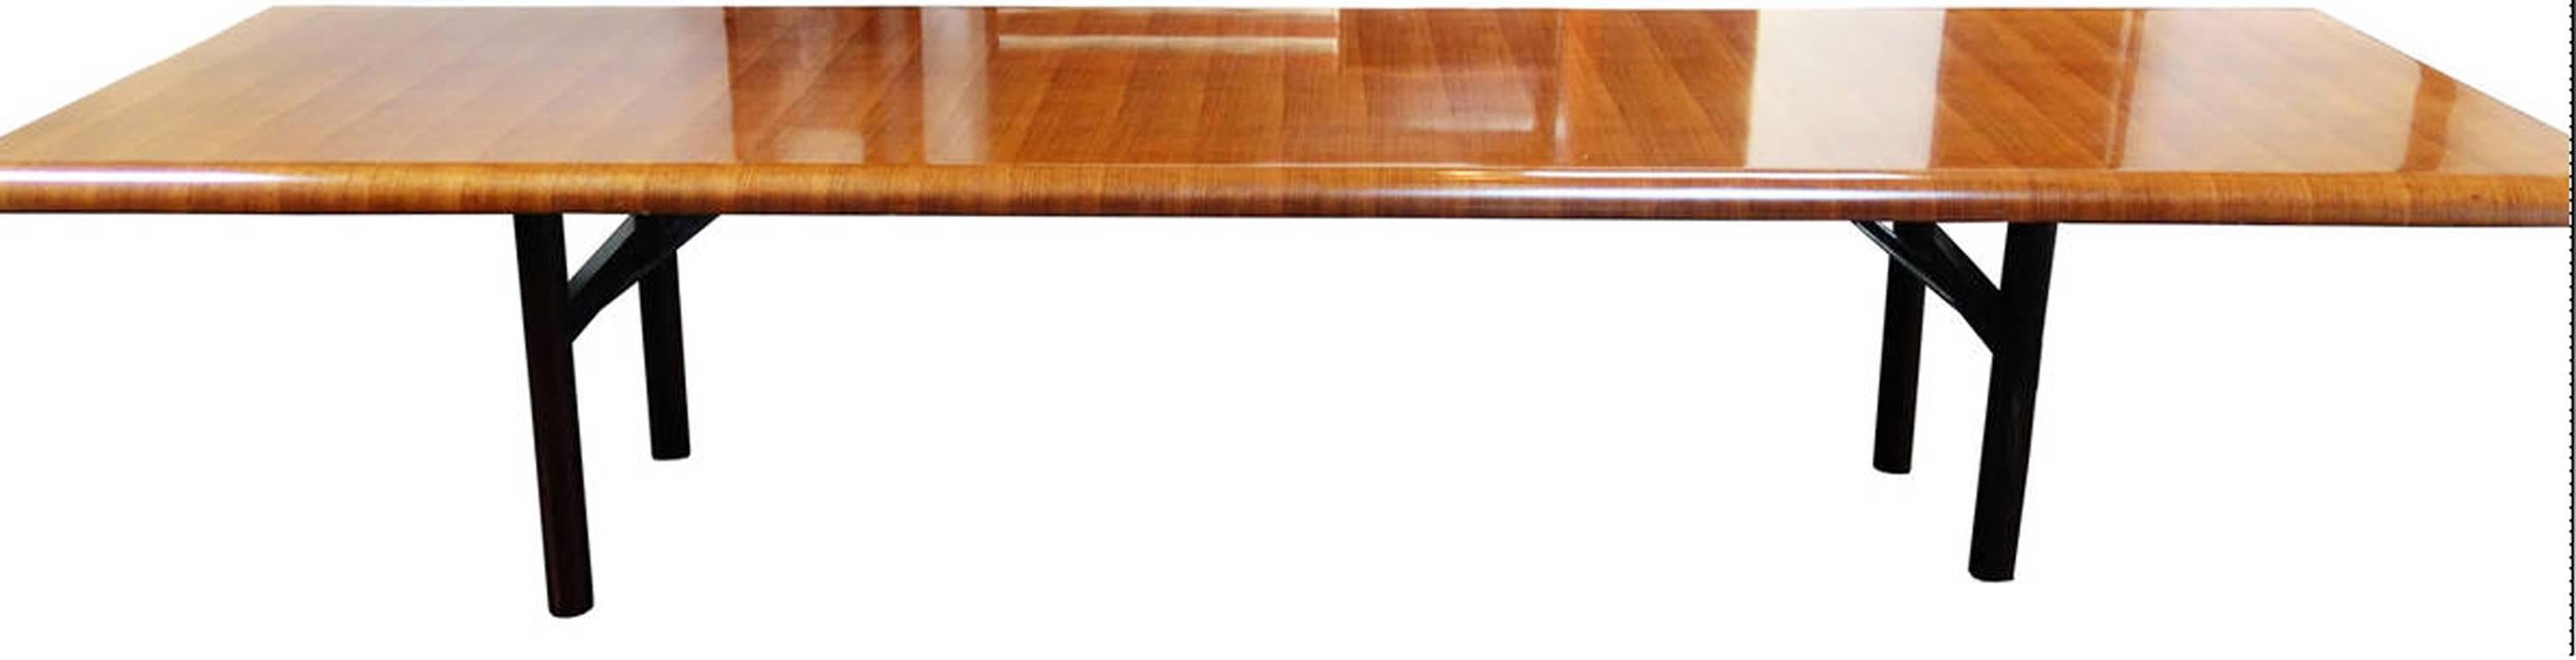 This exceptional oversized dining table has a perfect and fluid design with amazing airplane wing movement at its edges and a fabulous striped walnut wood, with a beautiful and sober structured steel base.
This Unique piece is handsome with a lot